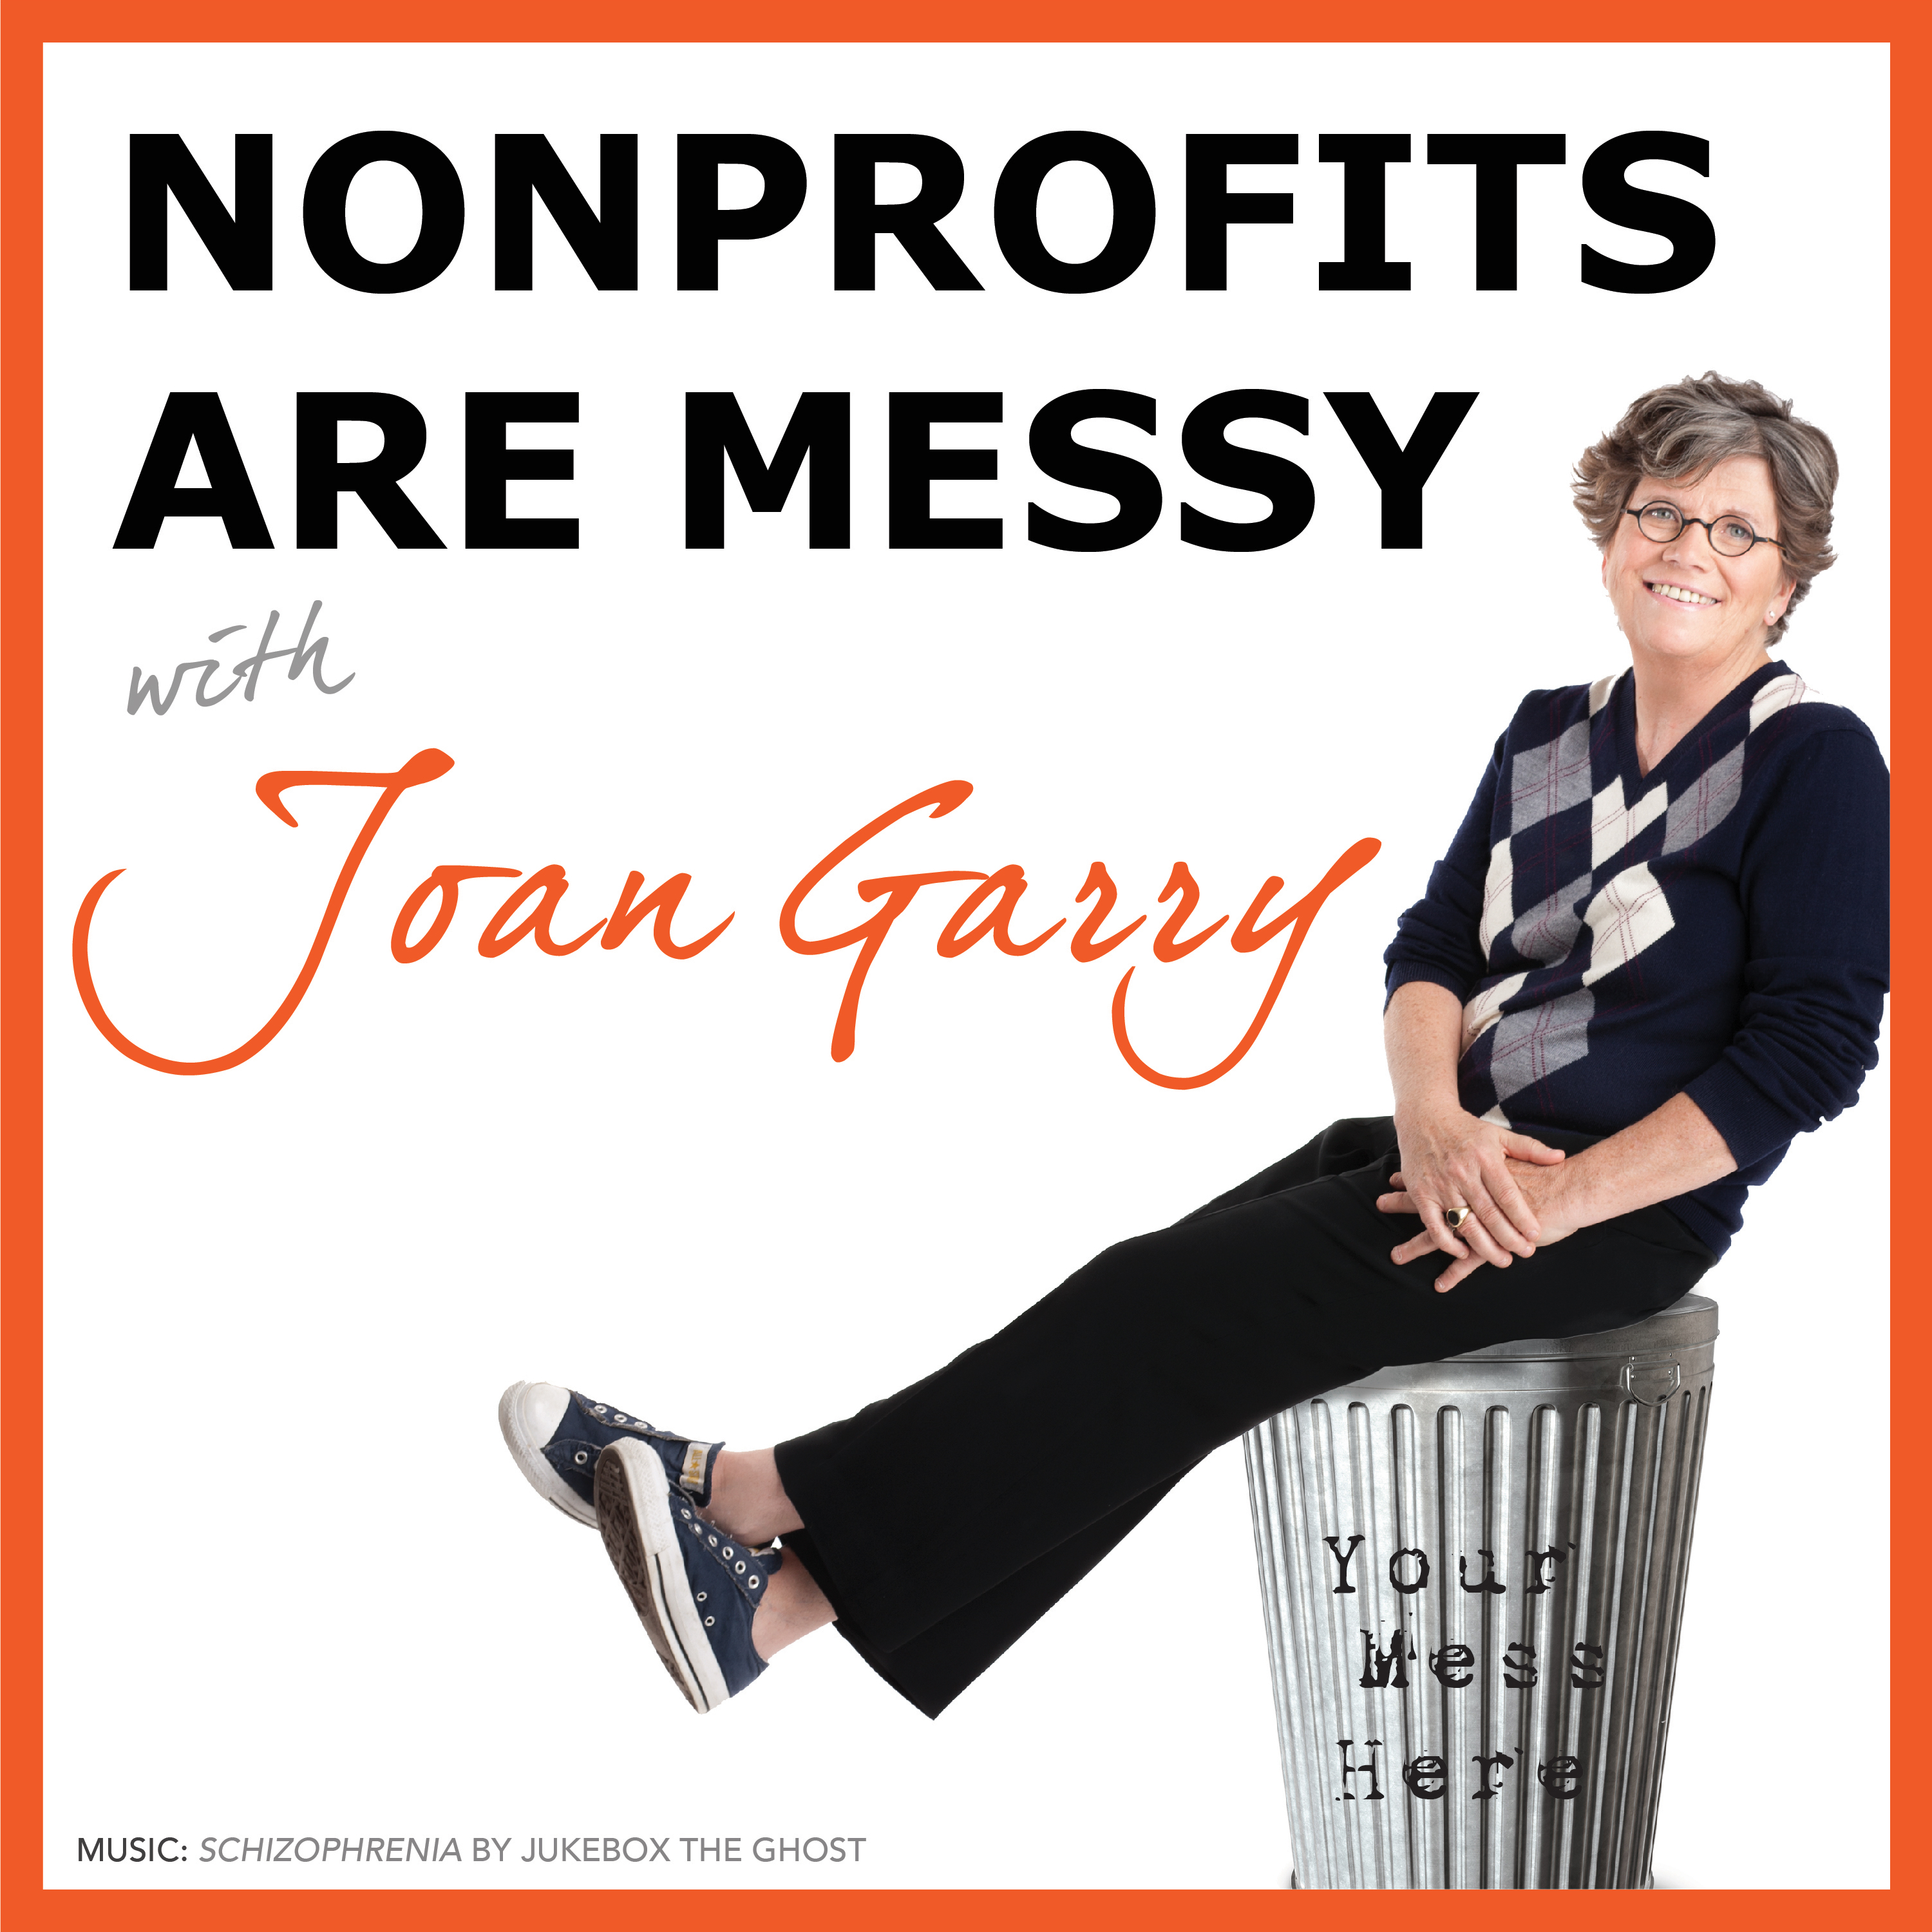 A highlight from Ep 148: Why Nonprofits Are Still Messy in 2021 (with Jim Axelrod)